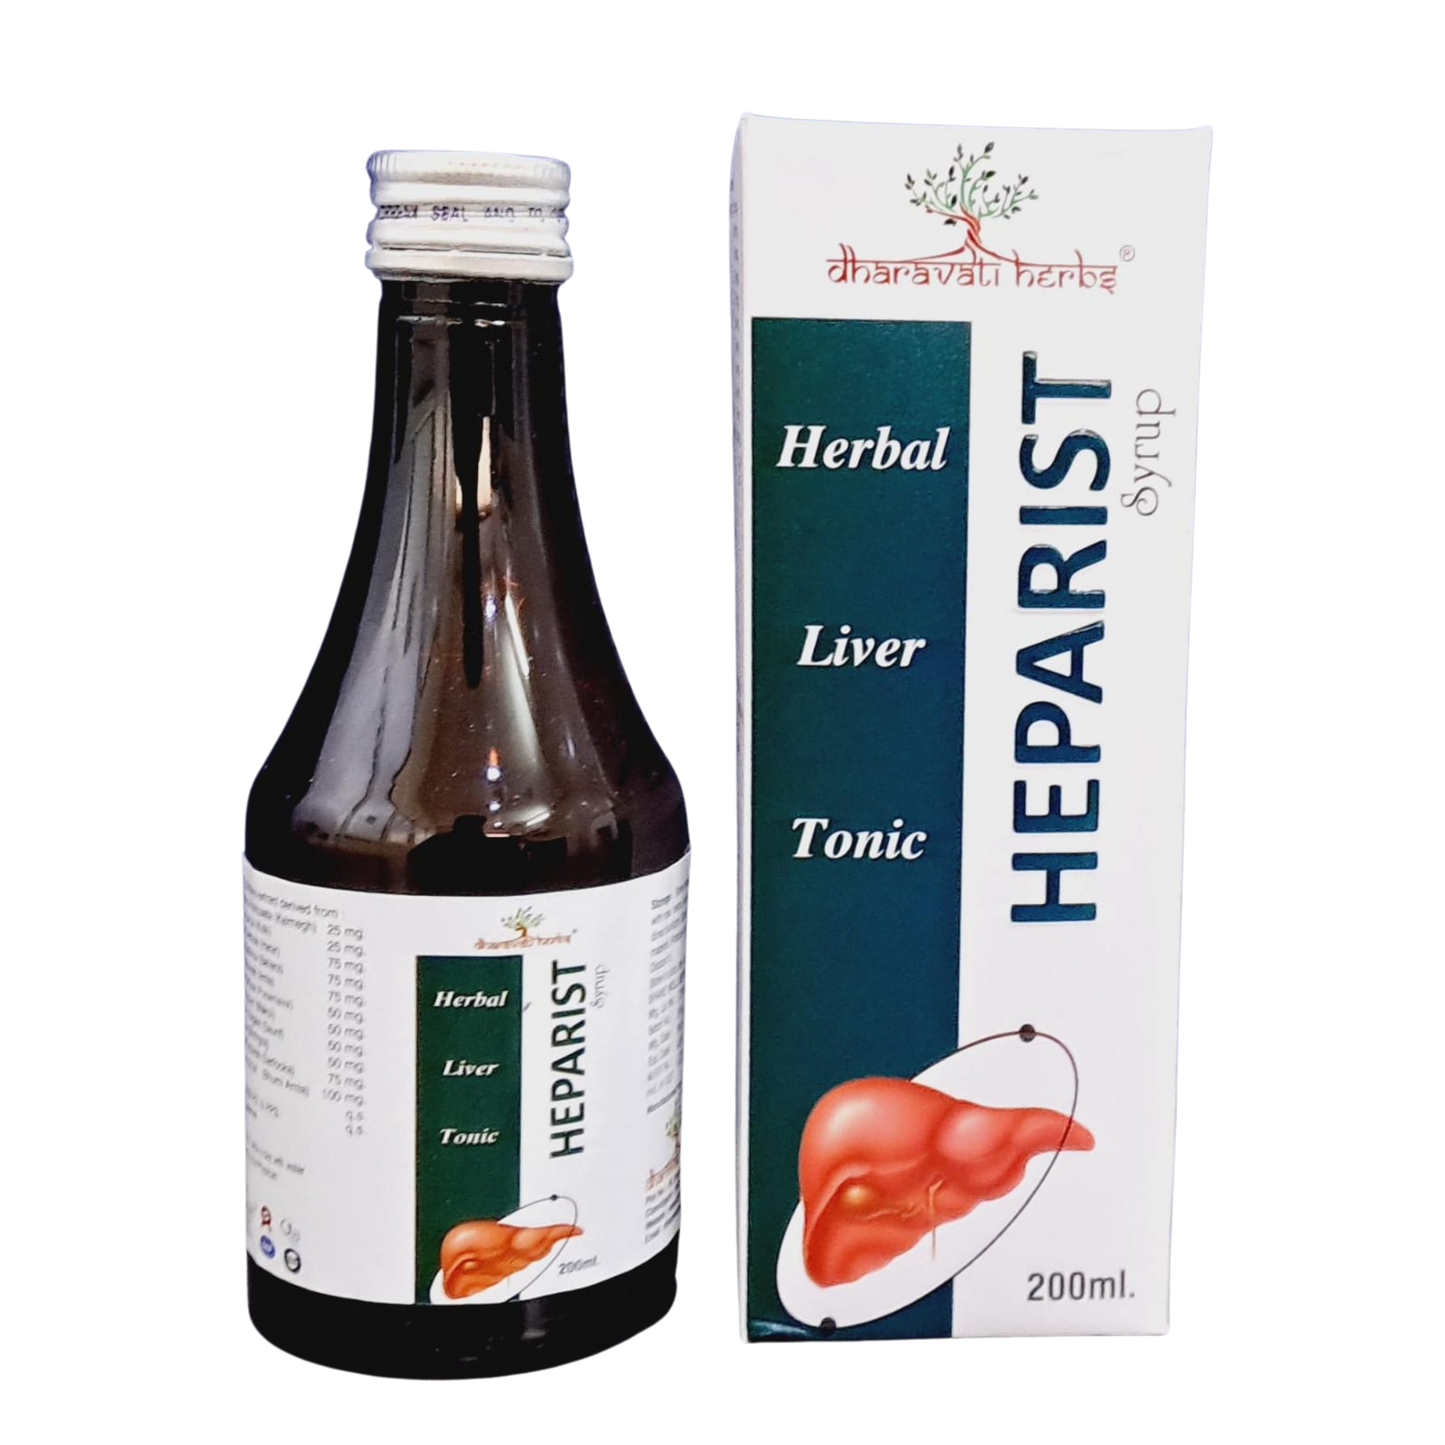 Dharavati Herbs Heparist Syrup | An Ayurvedic Liver Tonic | Beneficial for Liver | Heparist Herbal Liver Tonic- 200ml